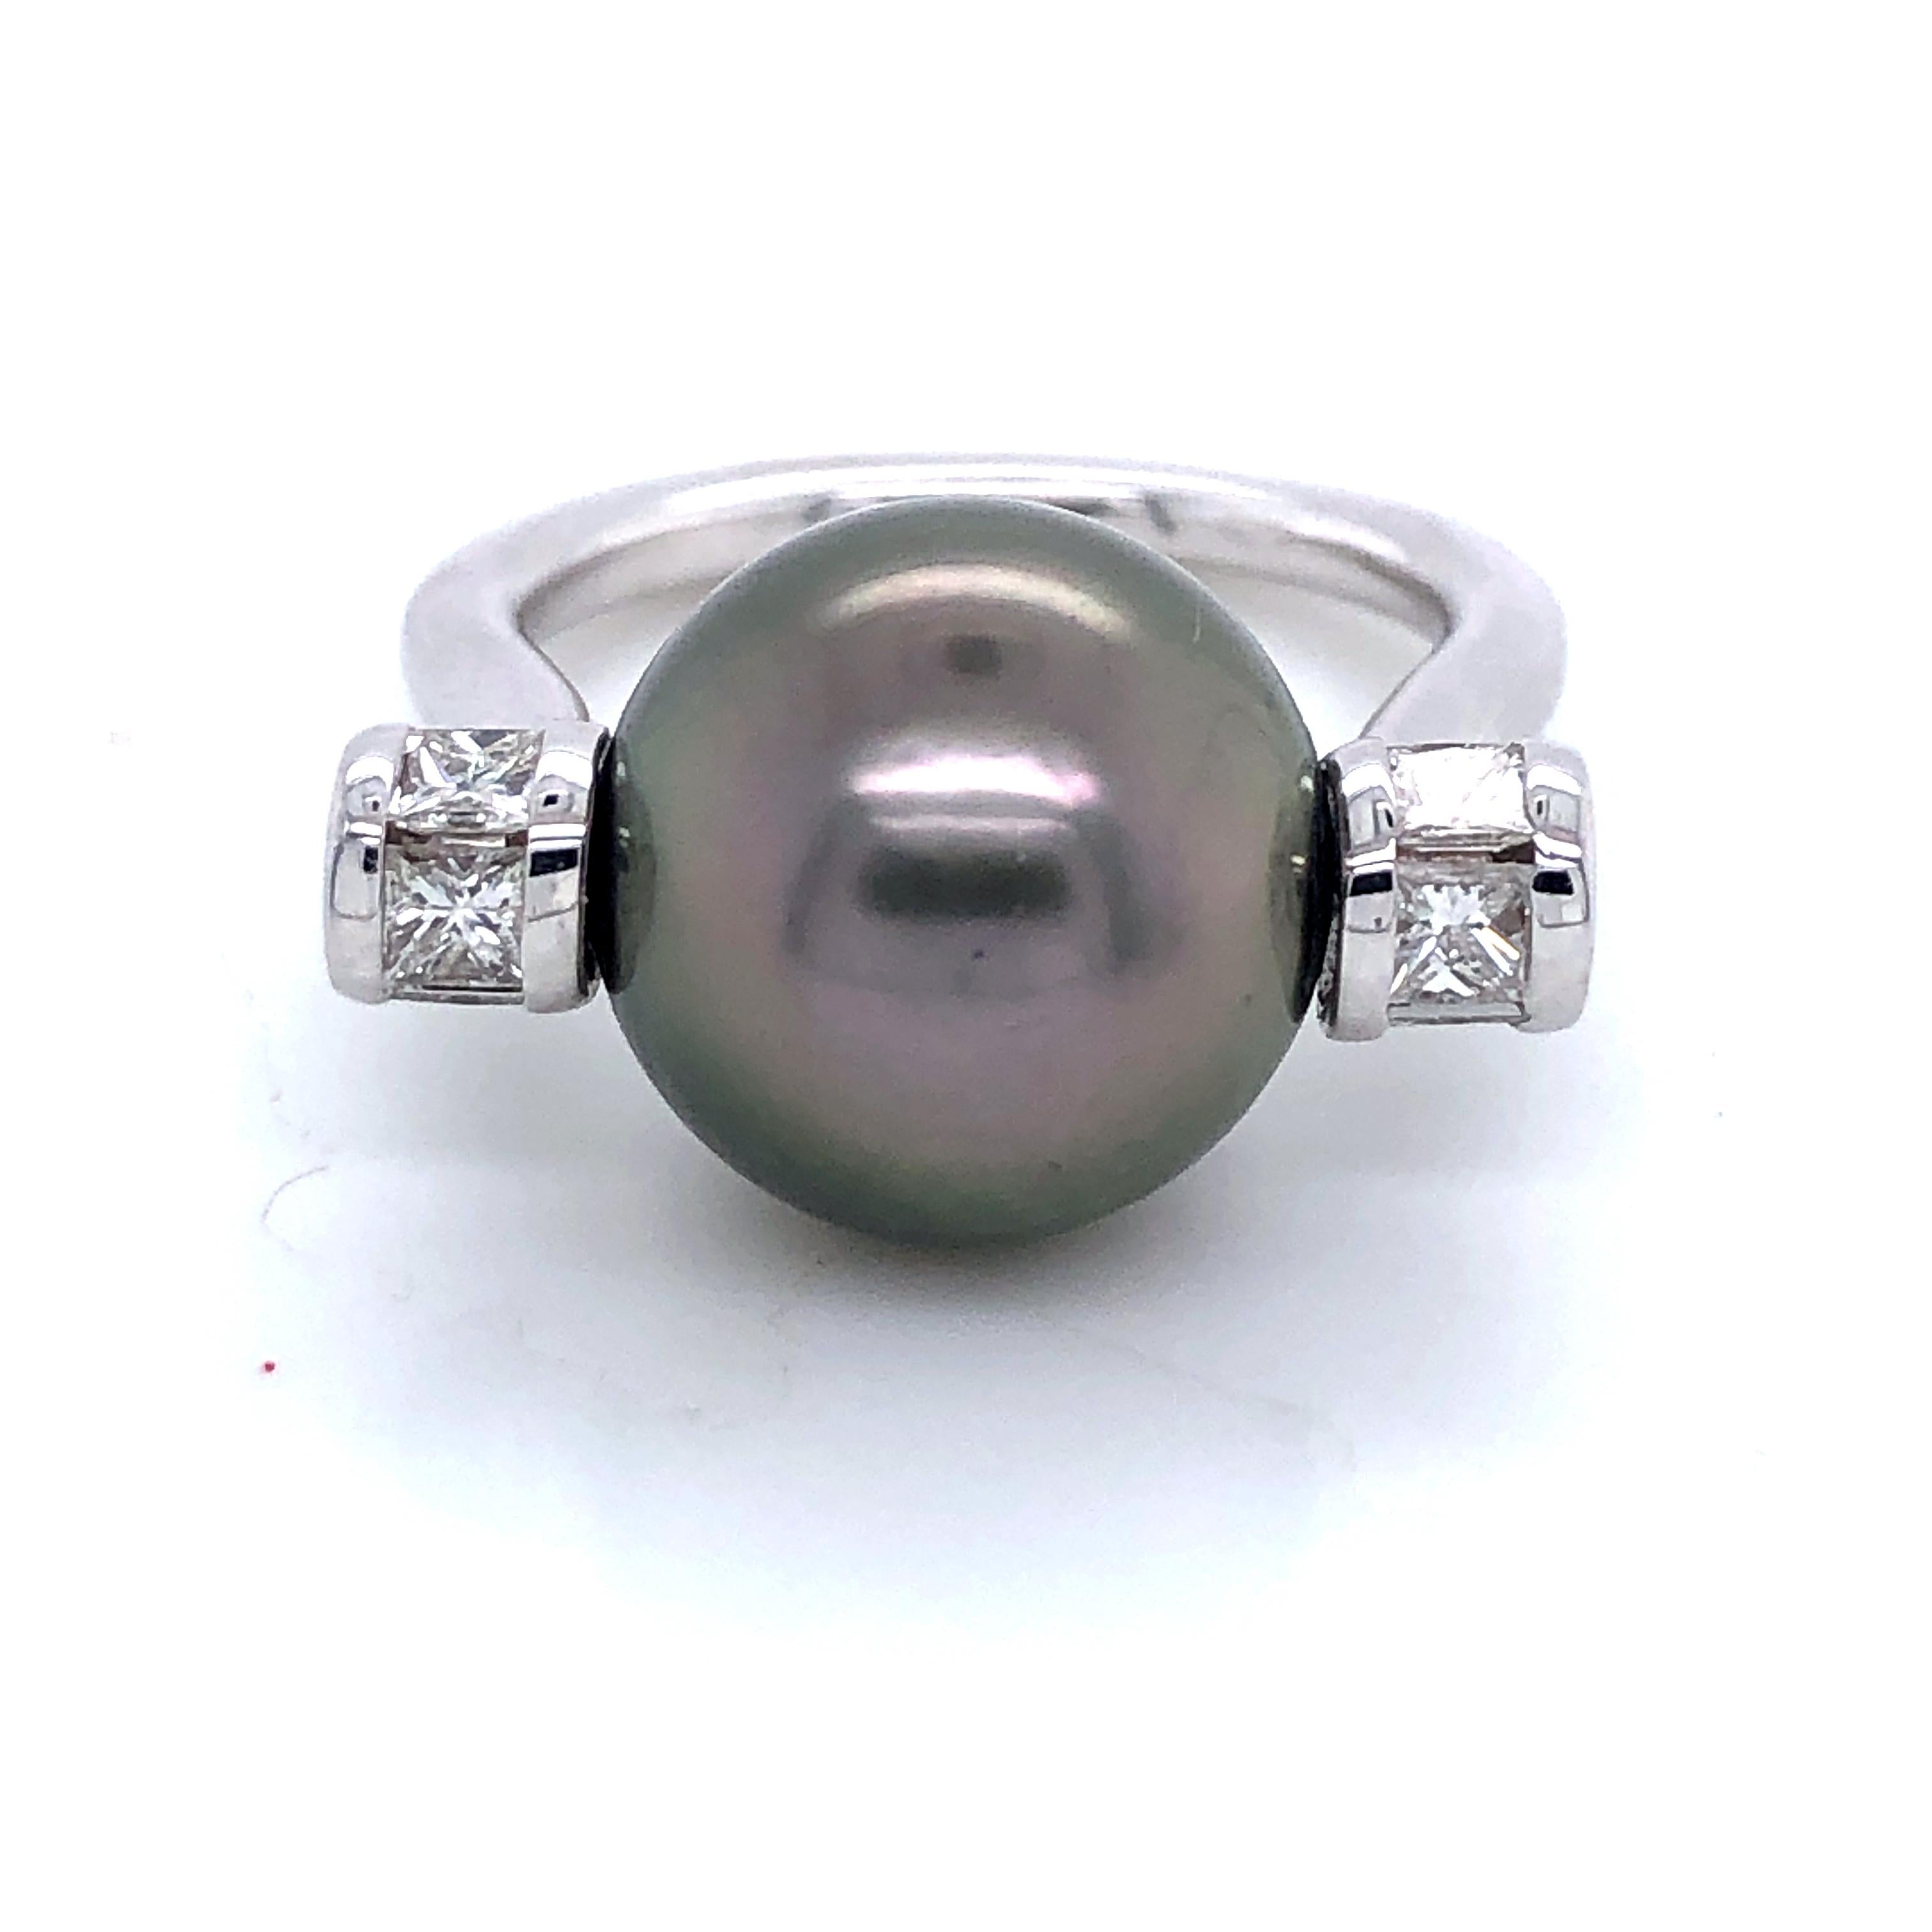 Discover the timeless elegance of this sumptuous Natural Tahitian Pearl and Diamond Ring, beautifully designed on a luxurious 18K White Gold band. An exquisite work of art that embodies the quintessence of luxury and refinement.

Princess cut